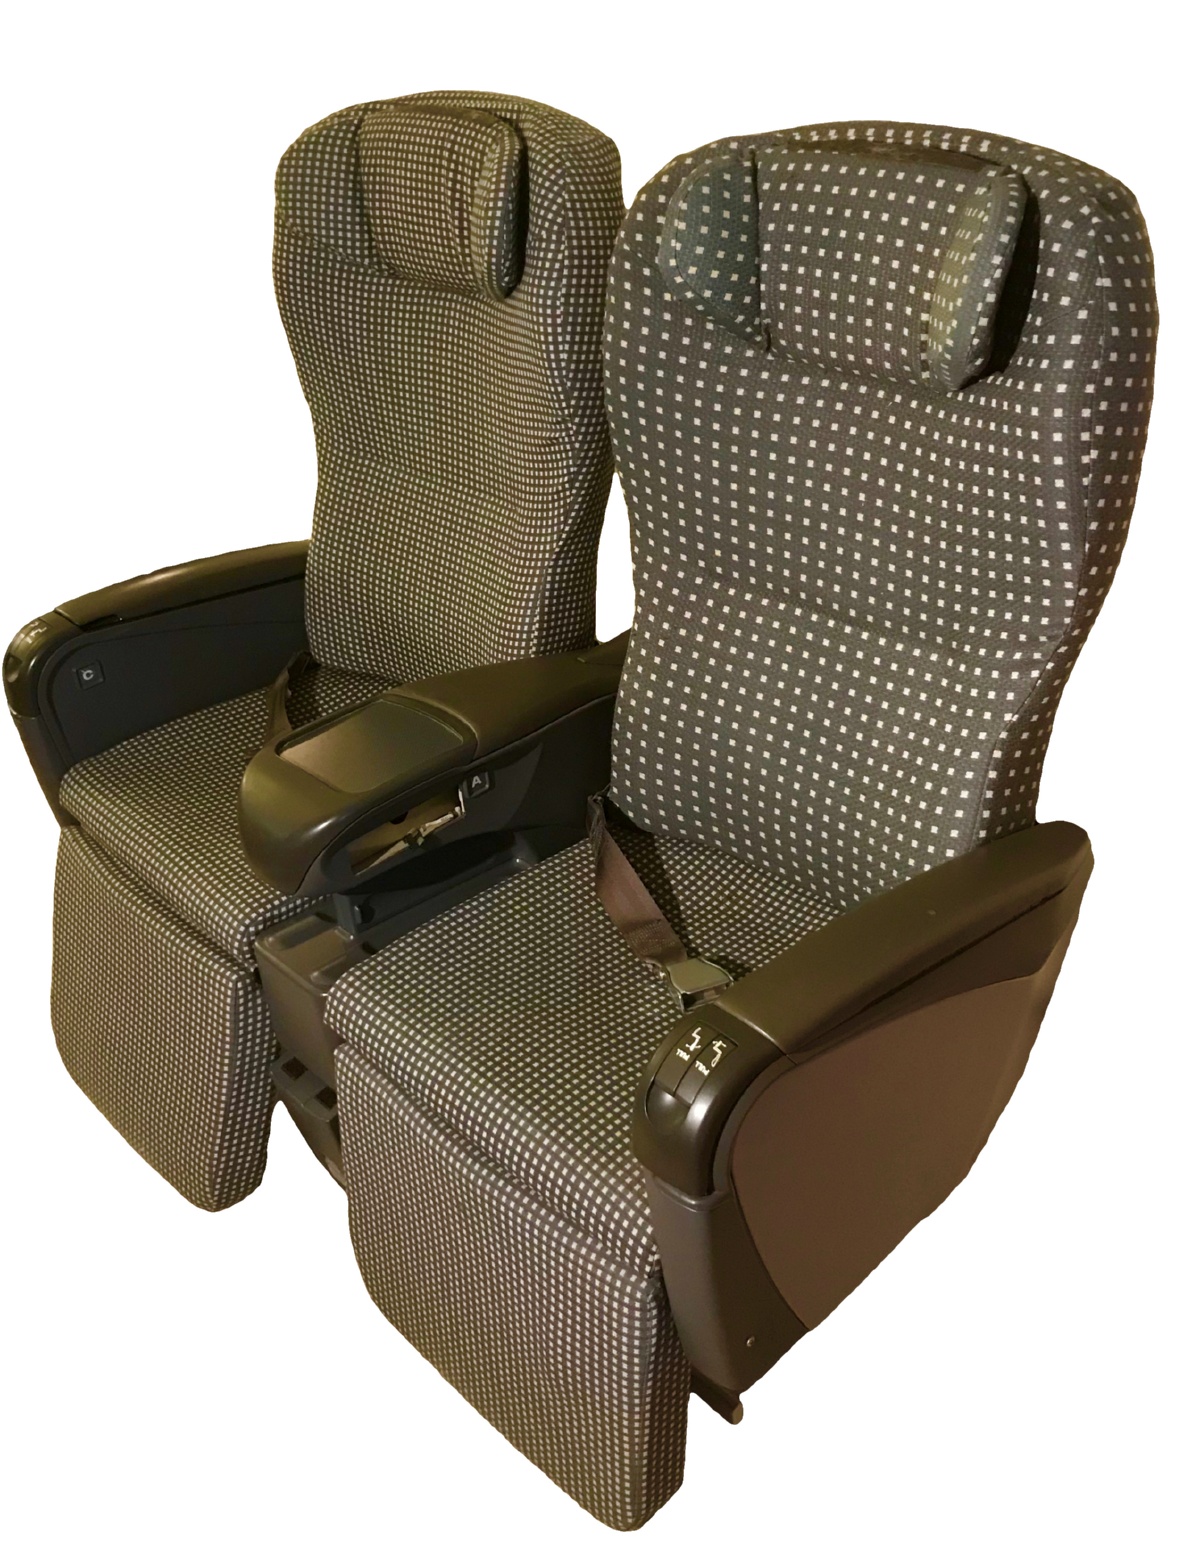 Japan Airlines 737 400 First Class Seats Diagional View